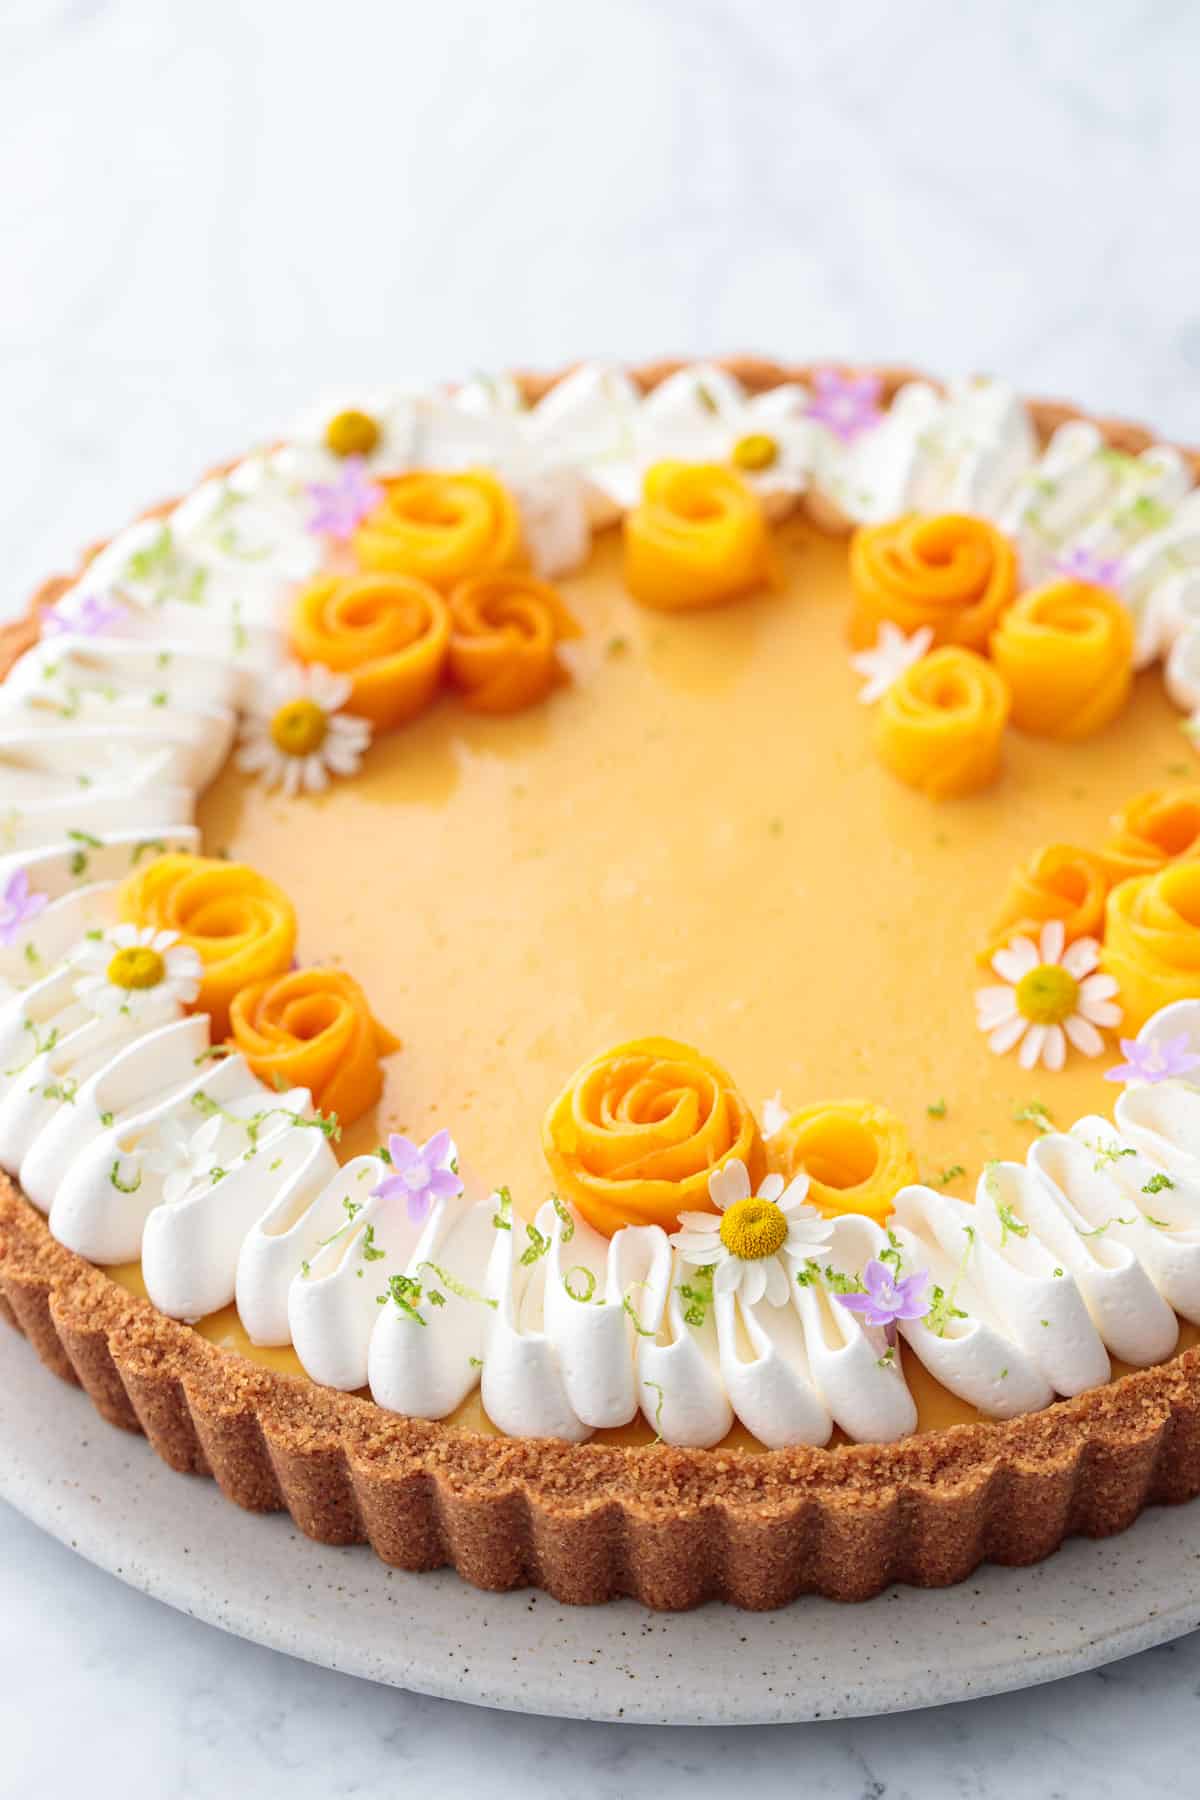 Closeup of a Mango Lime Tart with edible flowers and mango flowers for decoration.